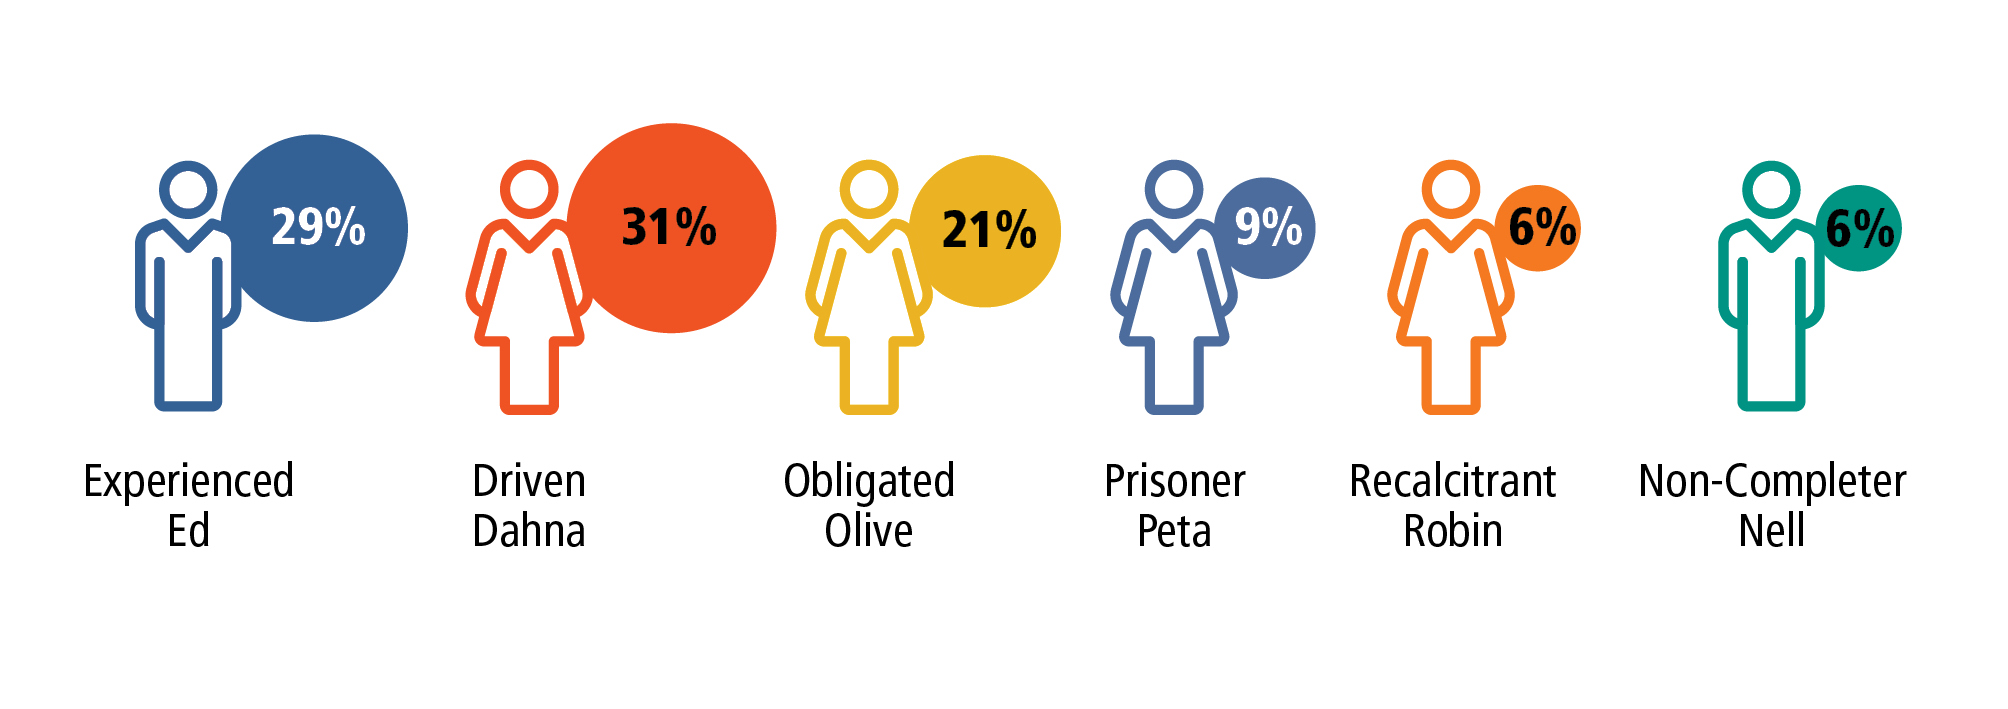 Infographic of six audience segments: Experienced Ed (29%); Driven Dahna (31%); Obligated Olive (21%); Prisoner Peta (9%), Recalcitrant Robin (6%), Non-Completer Nell (6%)